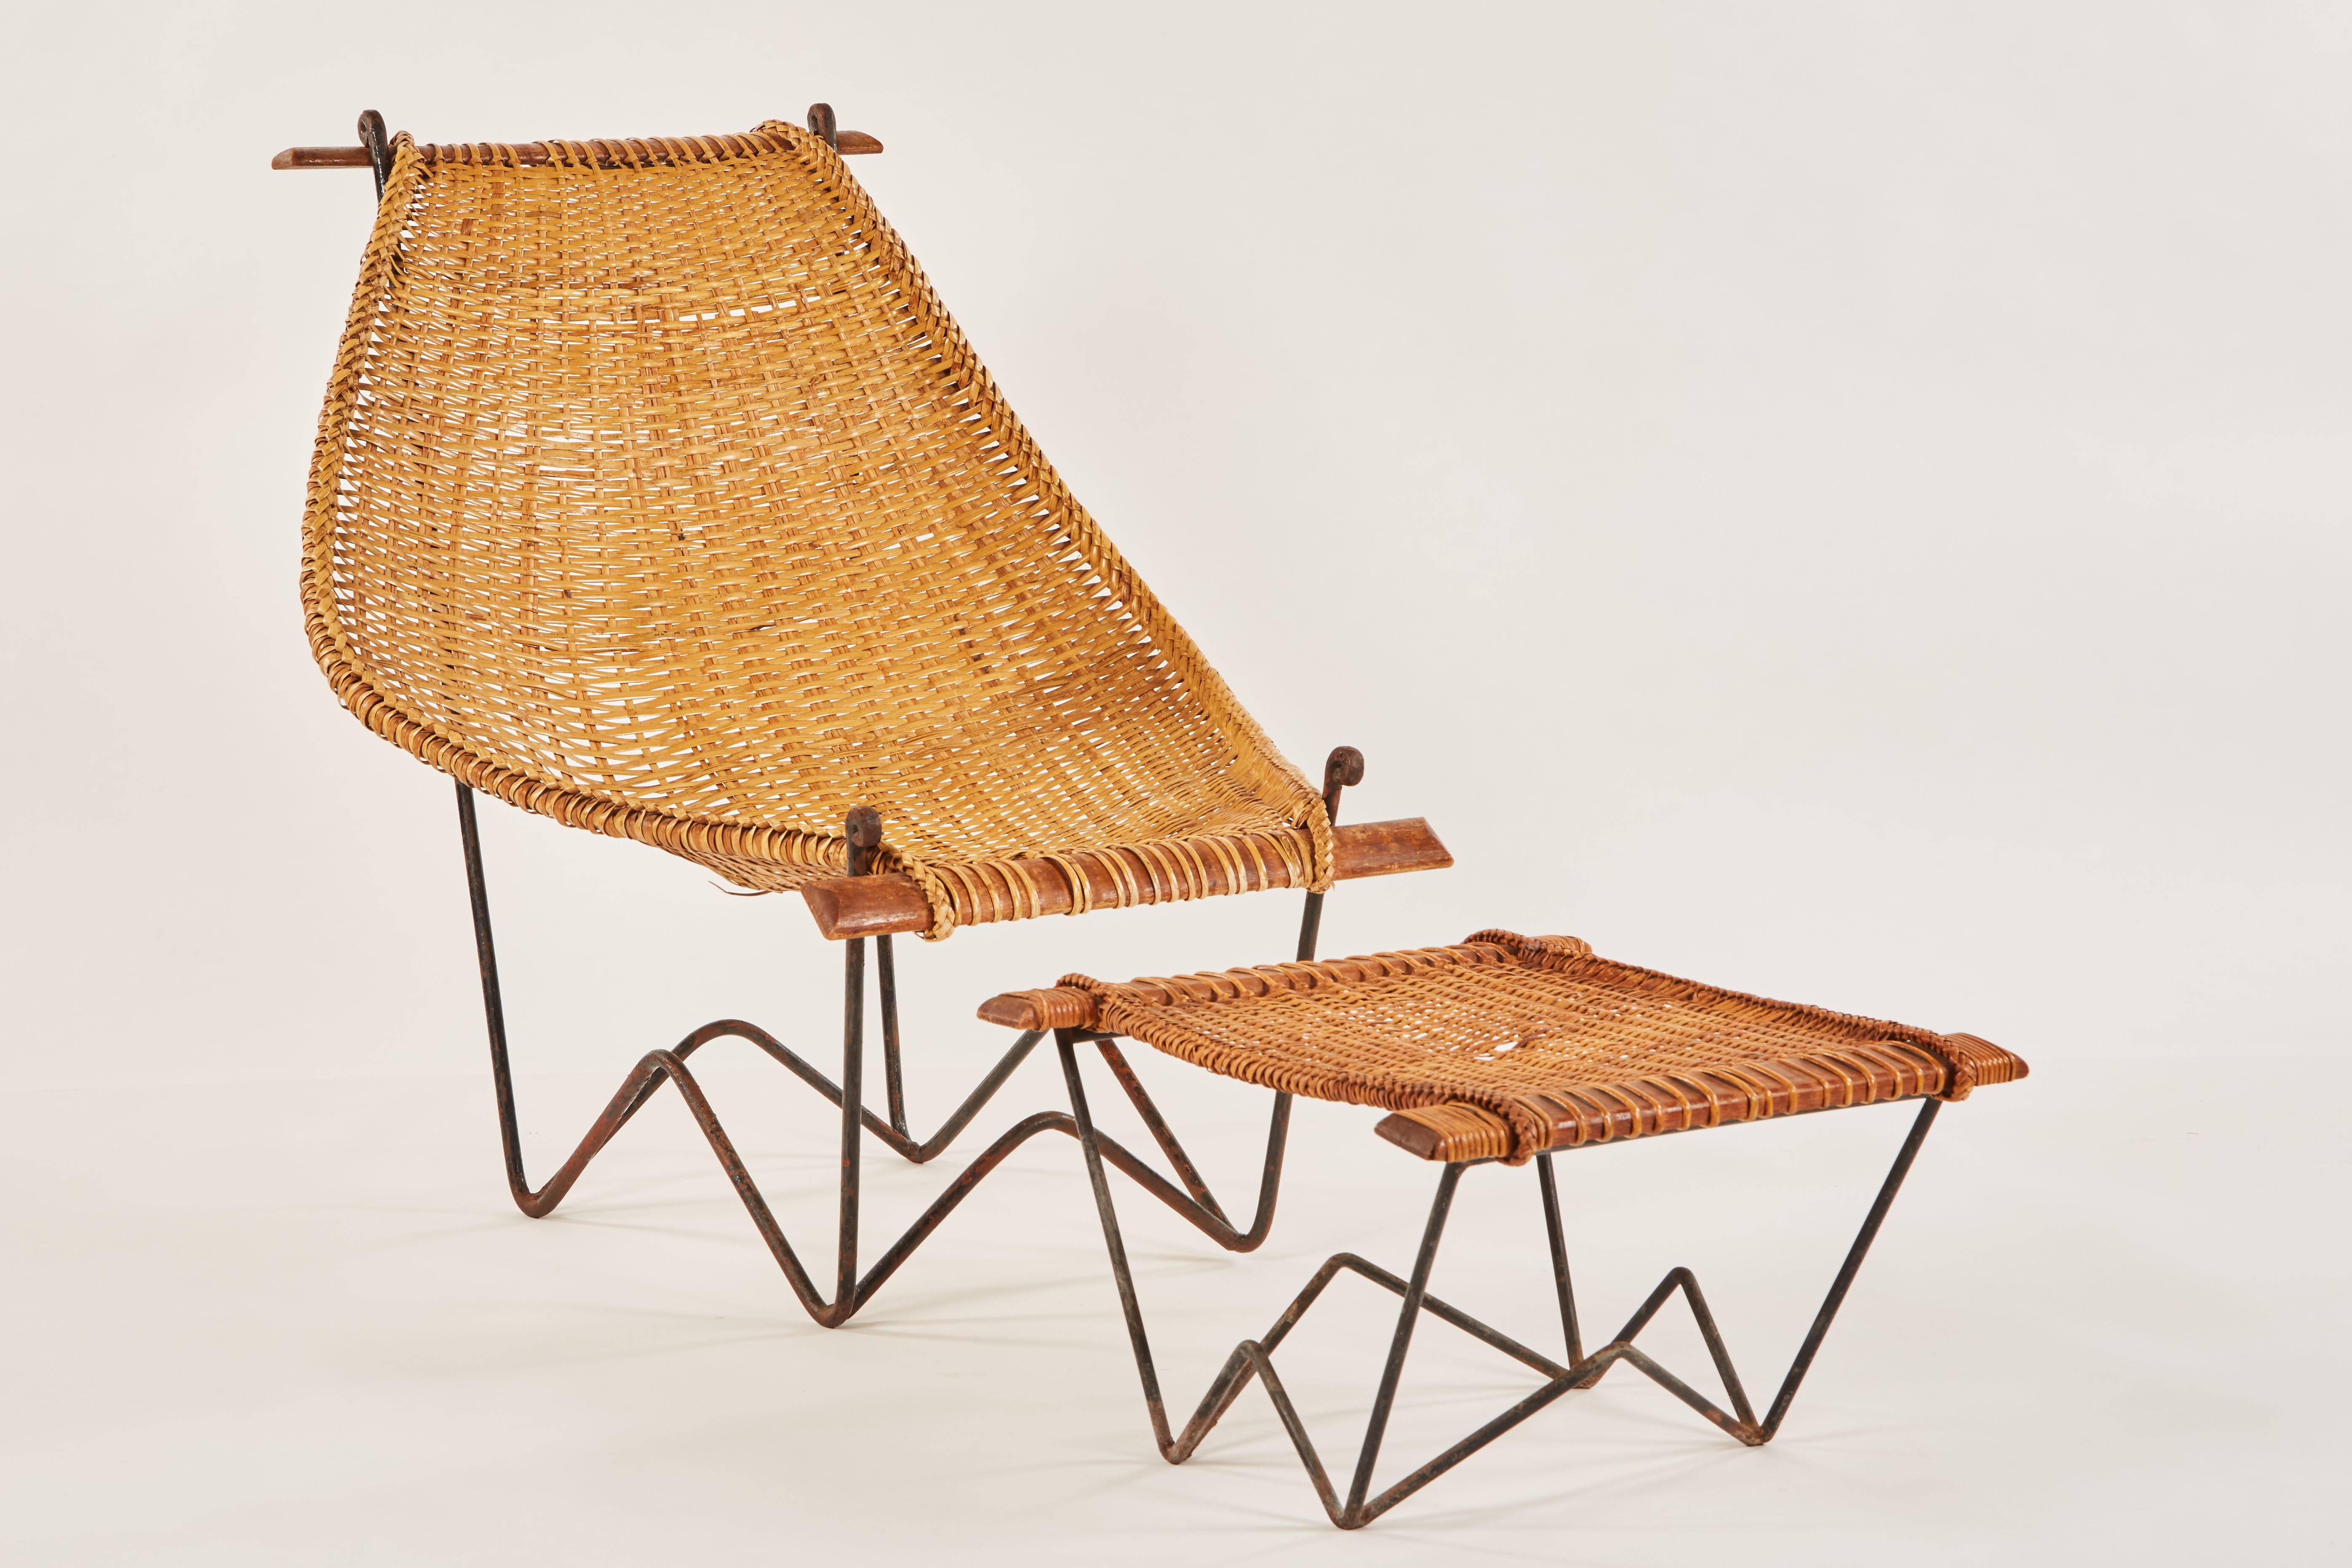 Early Duyan rattan and iron lounge chair and ottoman by John Risley. Made in USA, circa 1950s.

Ottoman measures 23" W x 23" D x 13" H.